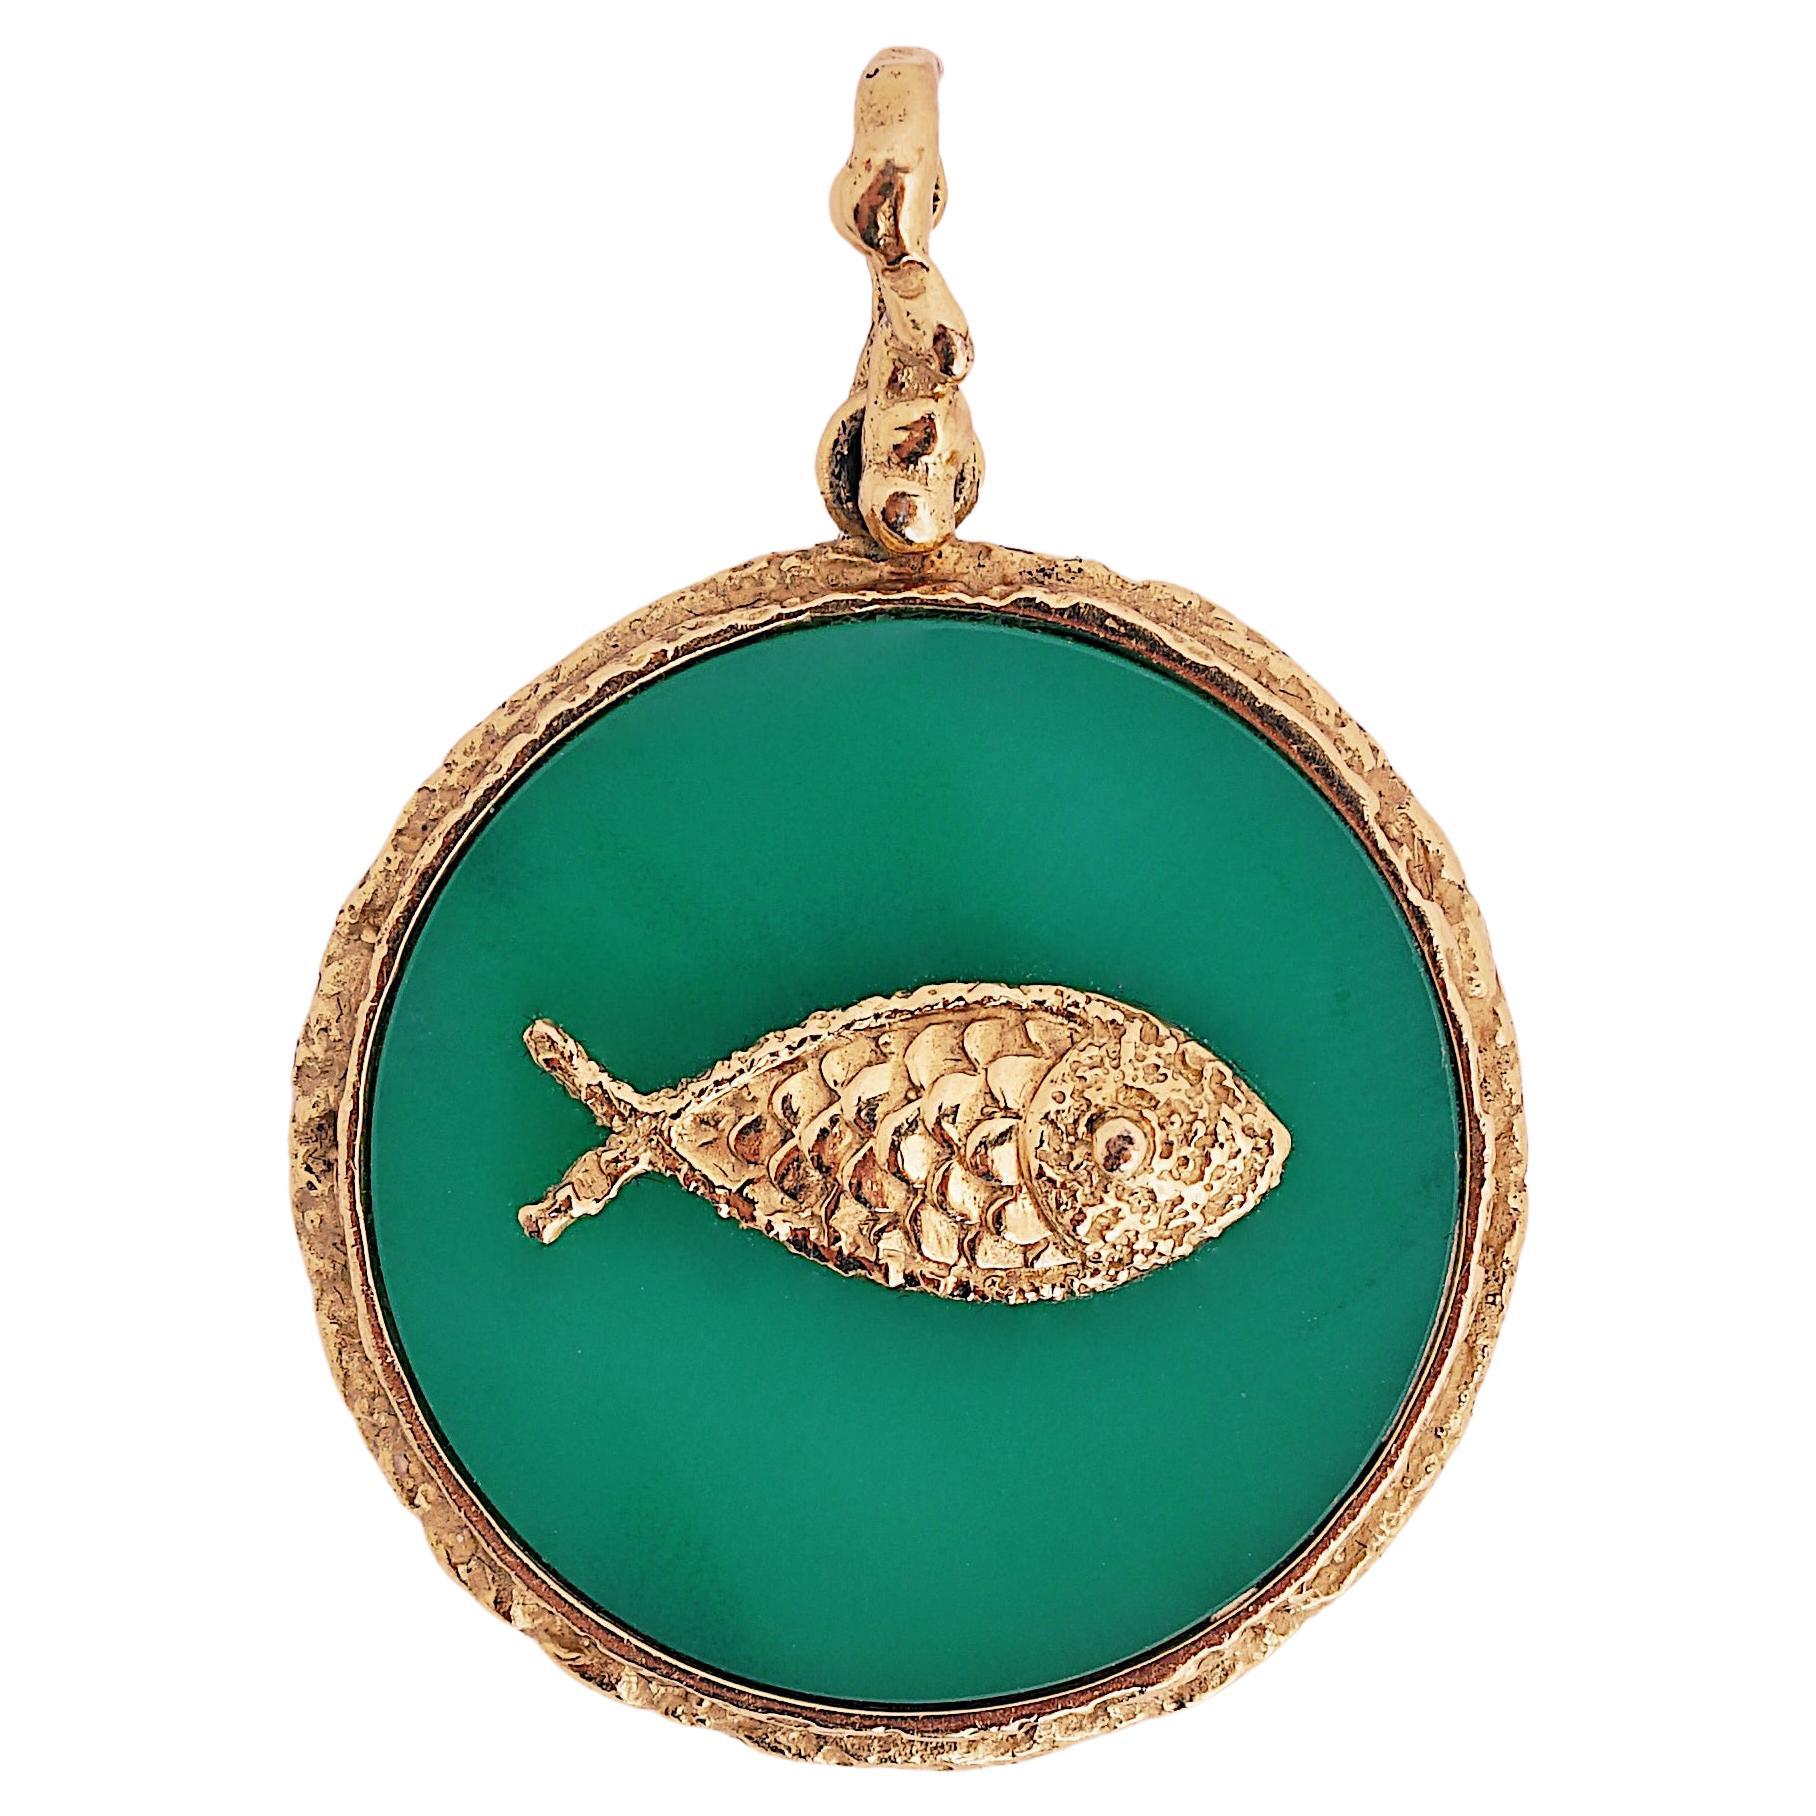 1963, Georges Braque "Idothee" 18K Gold and Chrysoprase Pendant For Sale